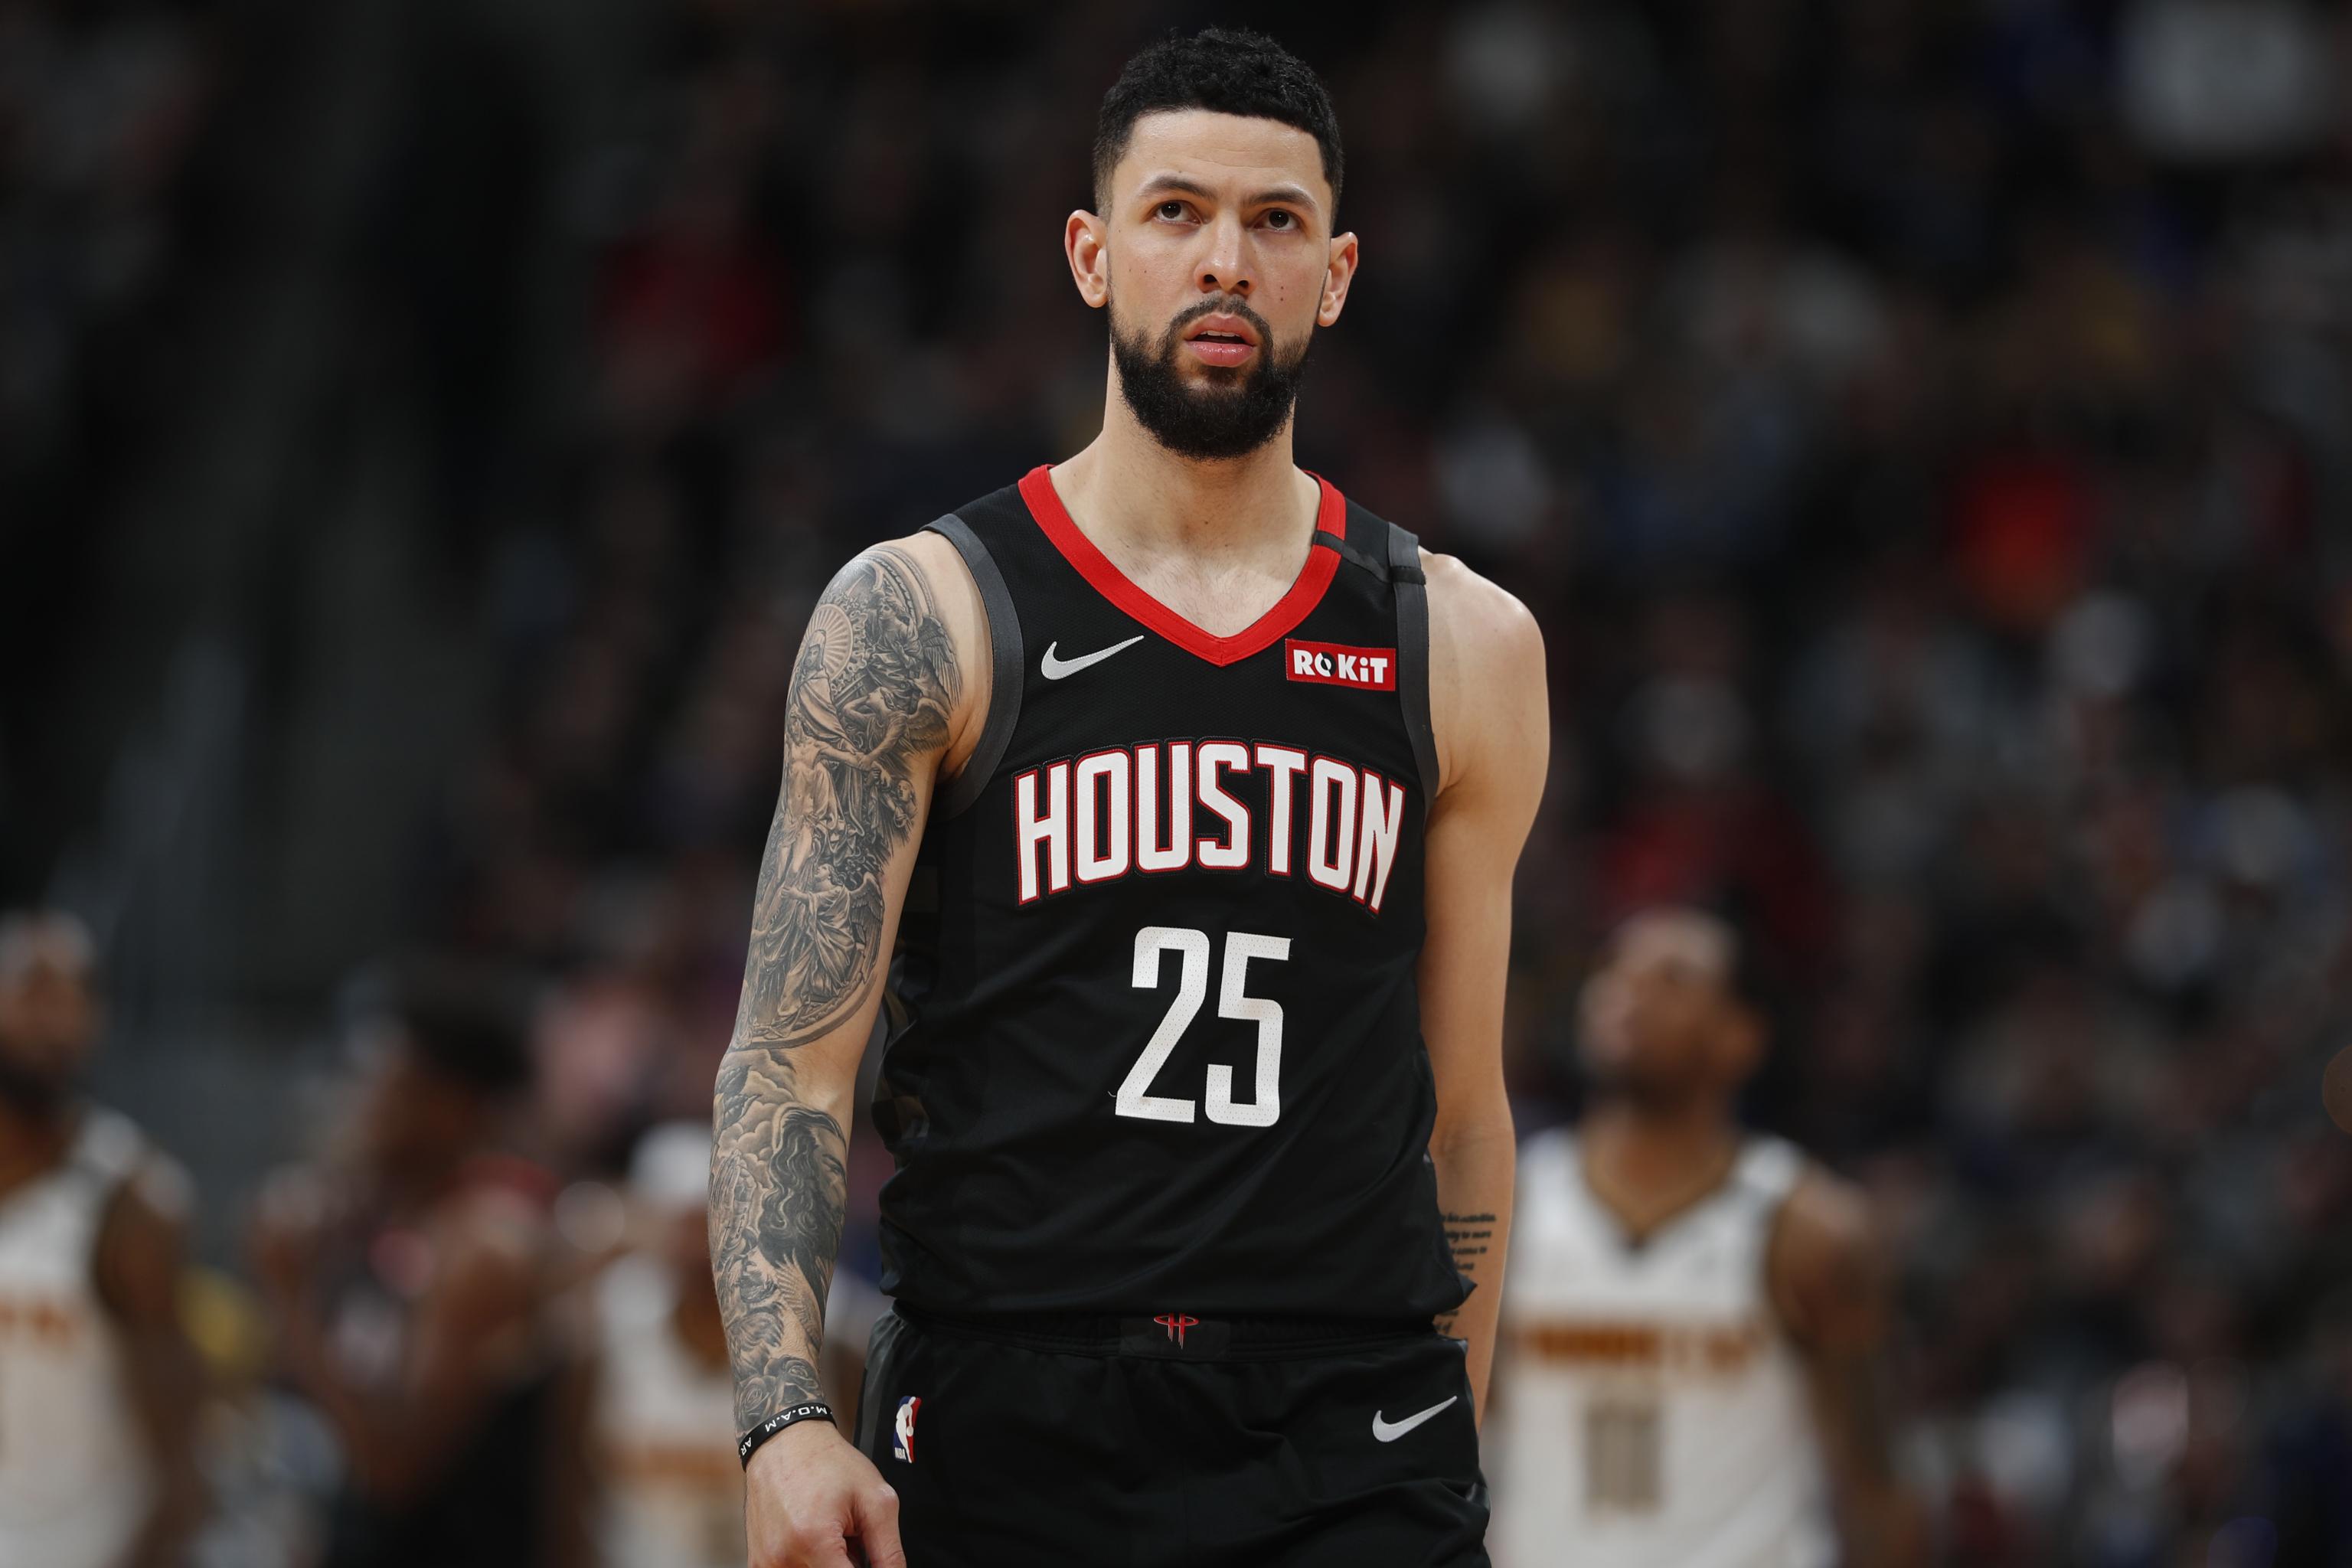 Austin Rivers wanted revenge against Knicks and got it